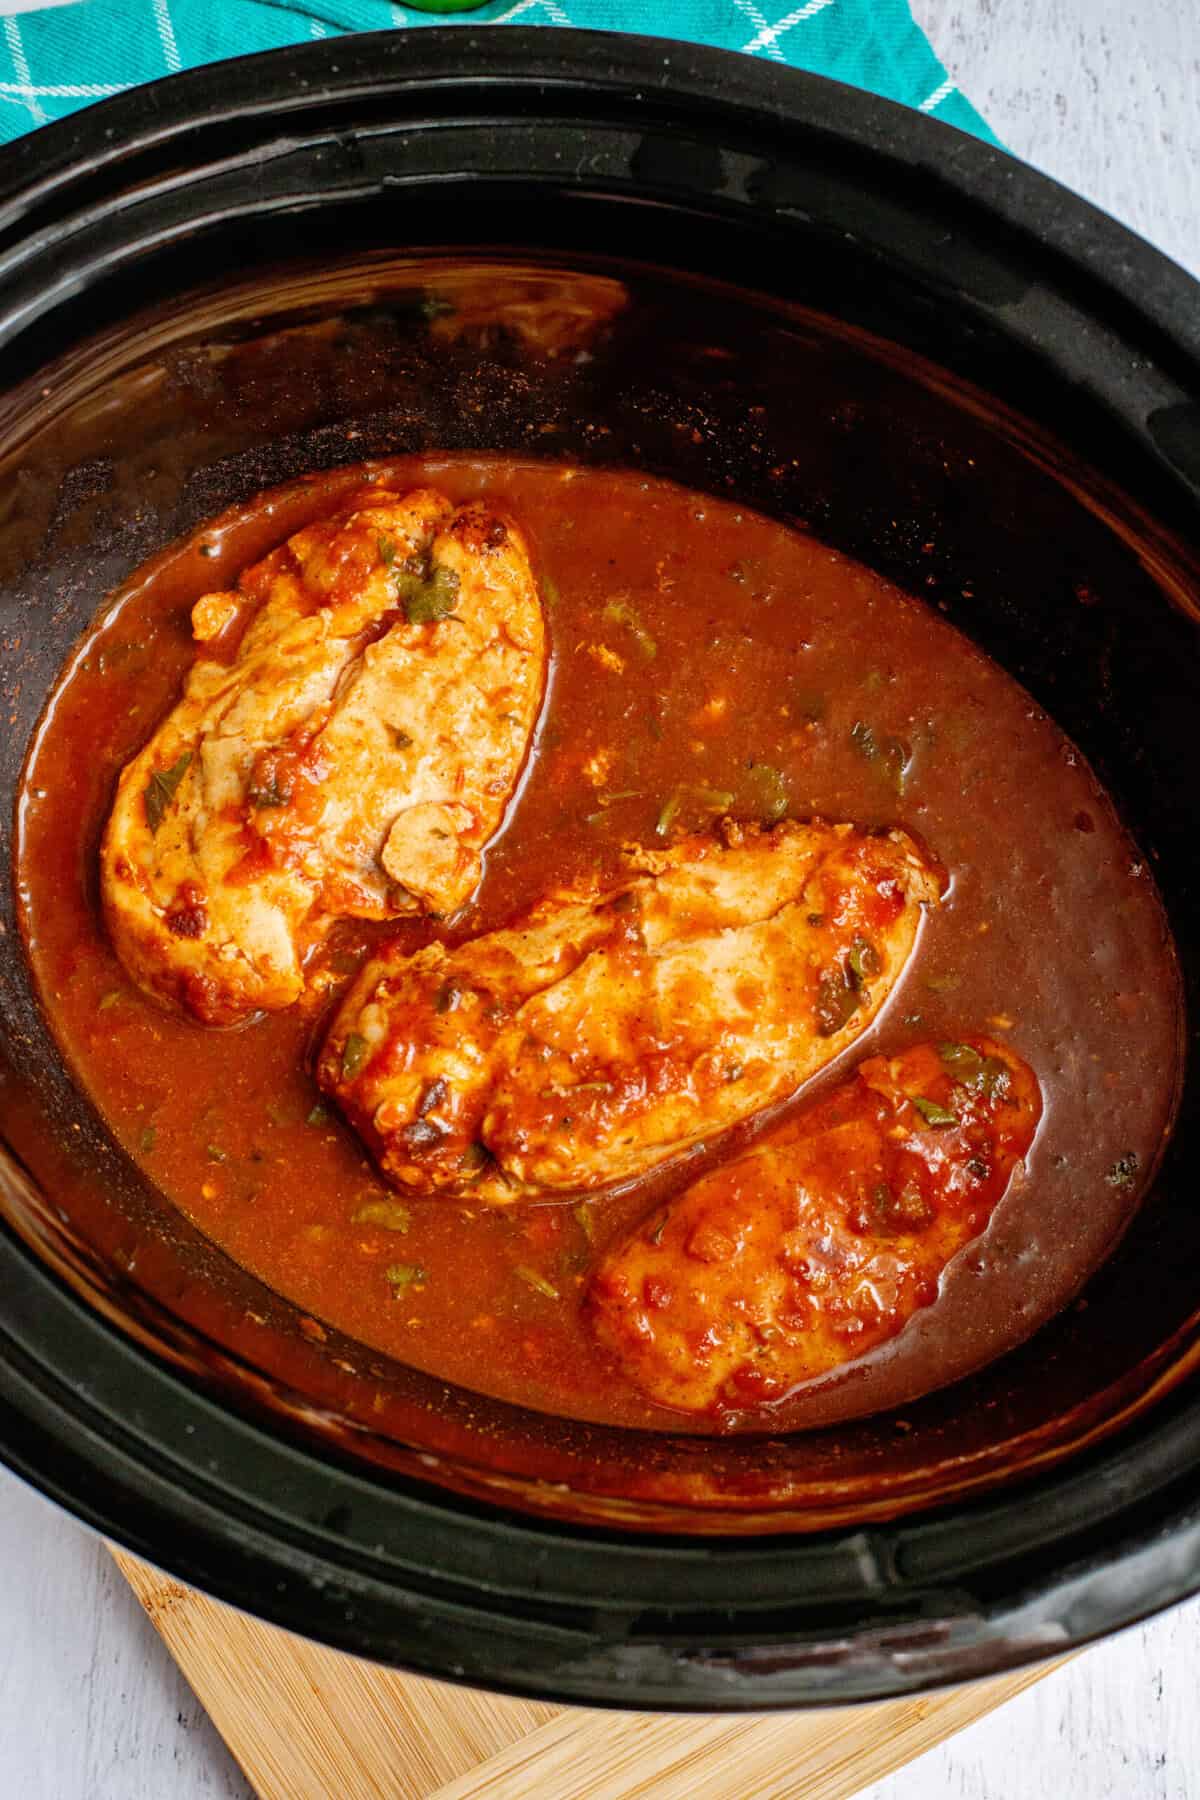 mix everything together. cooked crock pot chicken